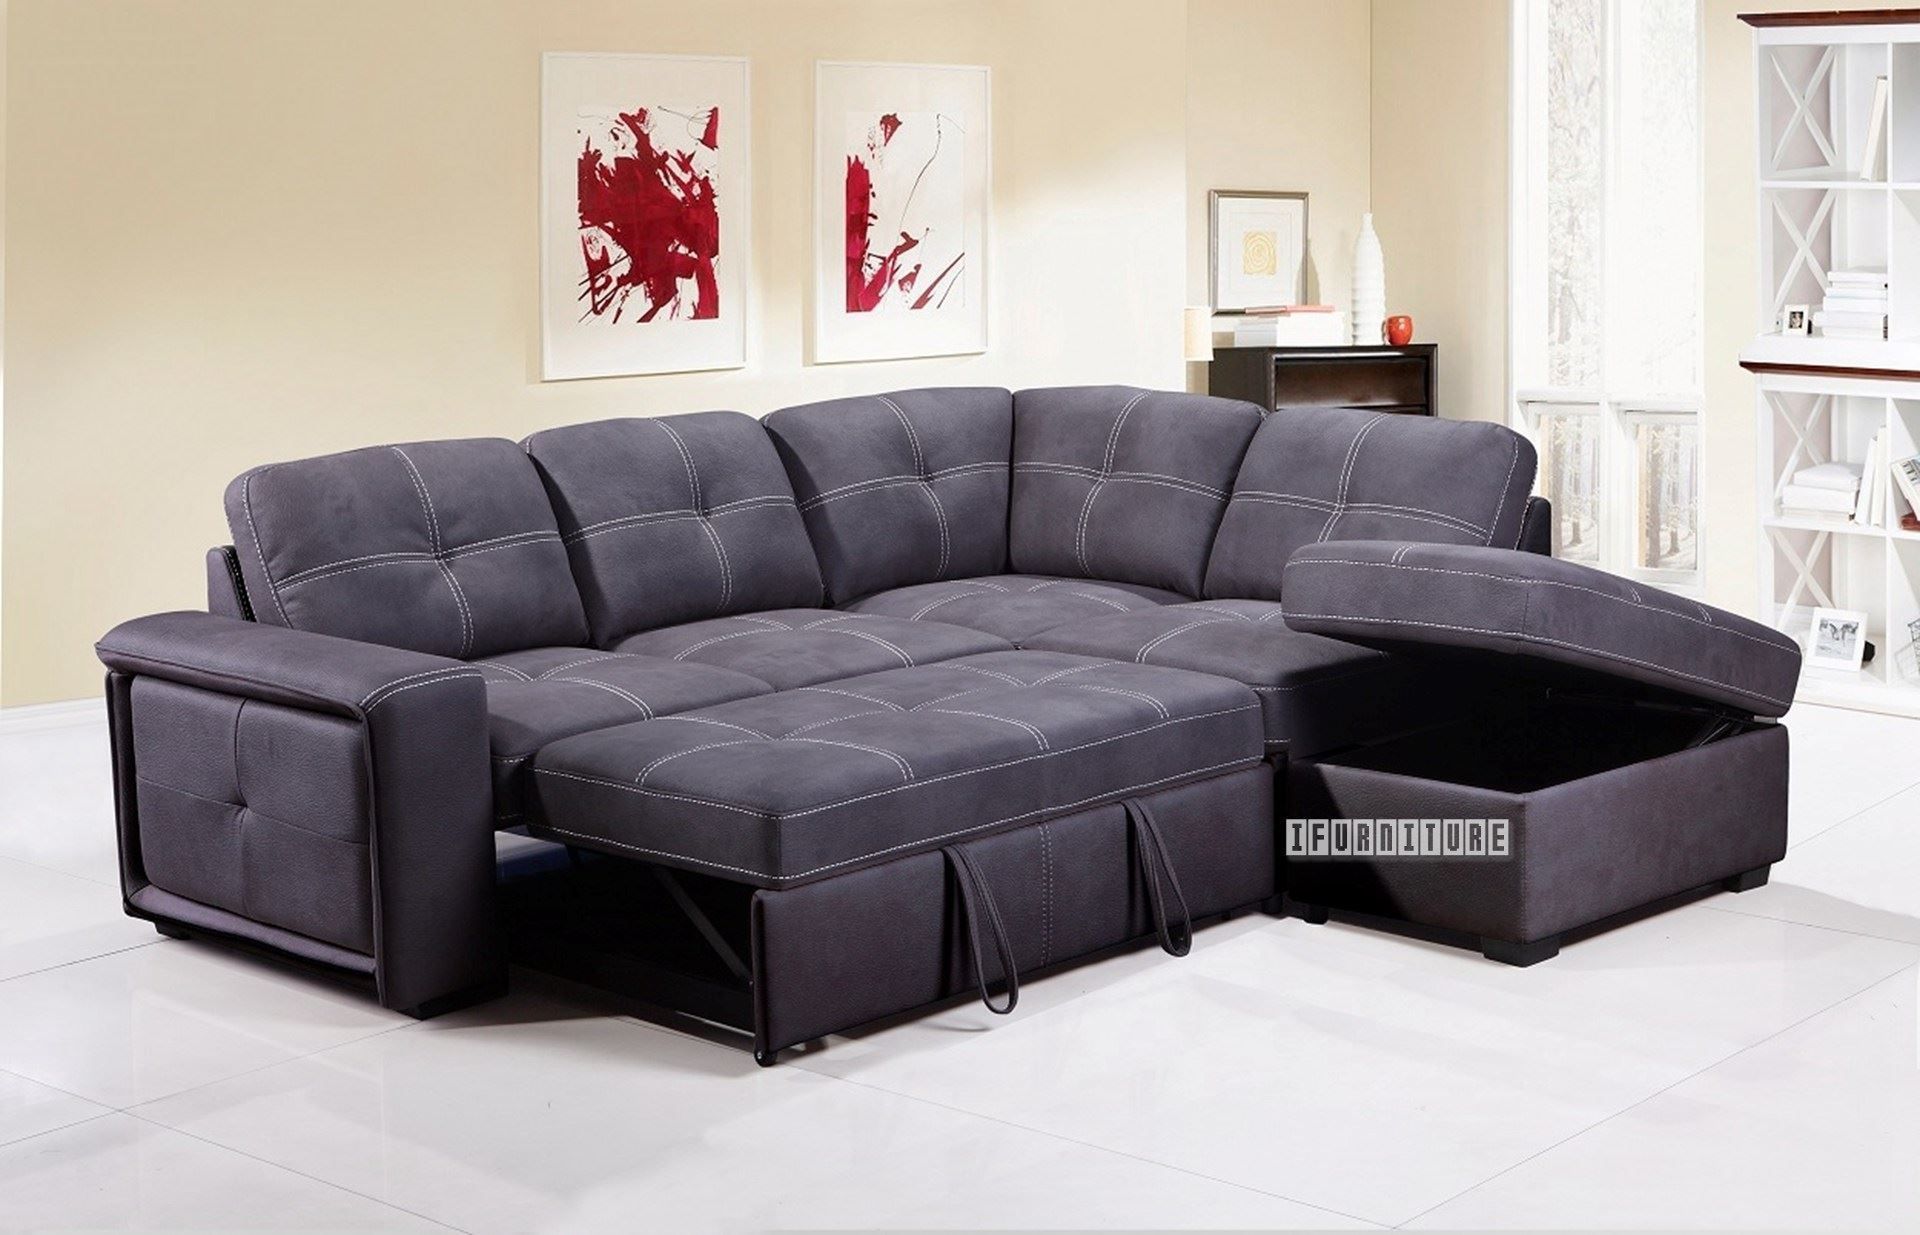 Bellini Sectional Sofa Bed With Storage *grey Intended For Celine Sectional Futon Sofas With Storage Reclining Couch (View 2 of 15)